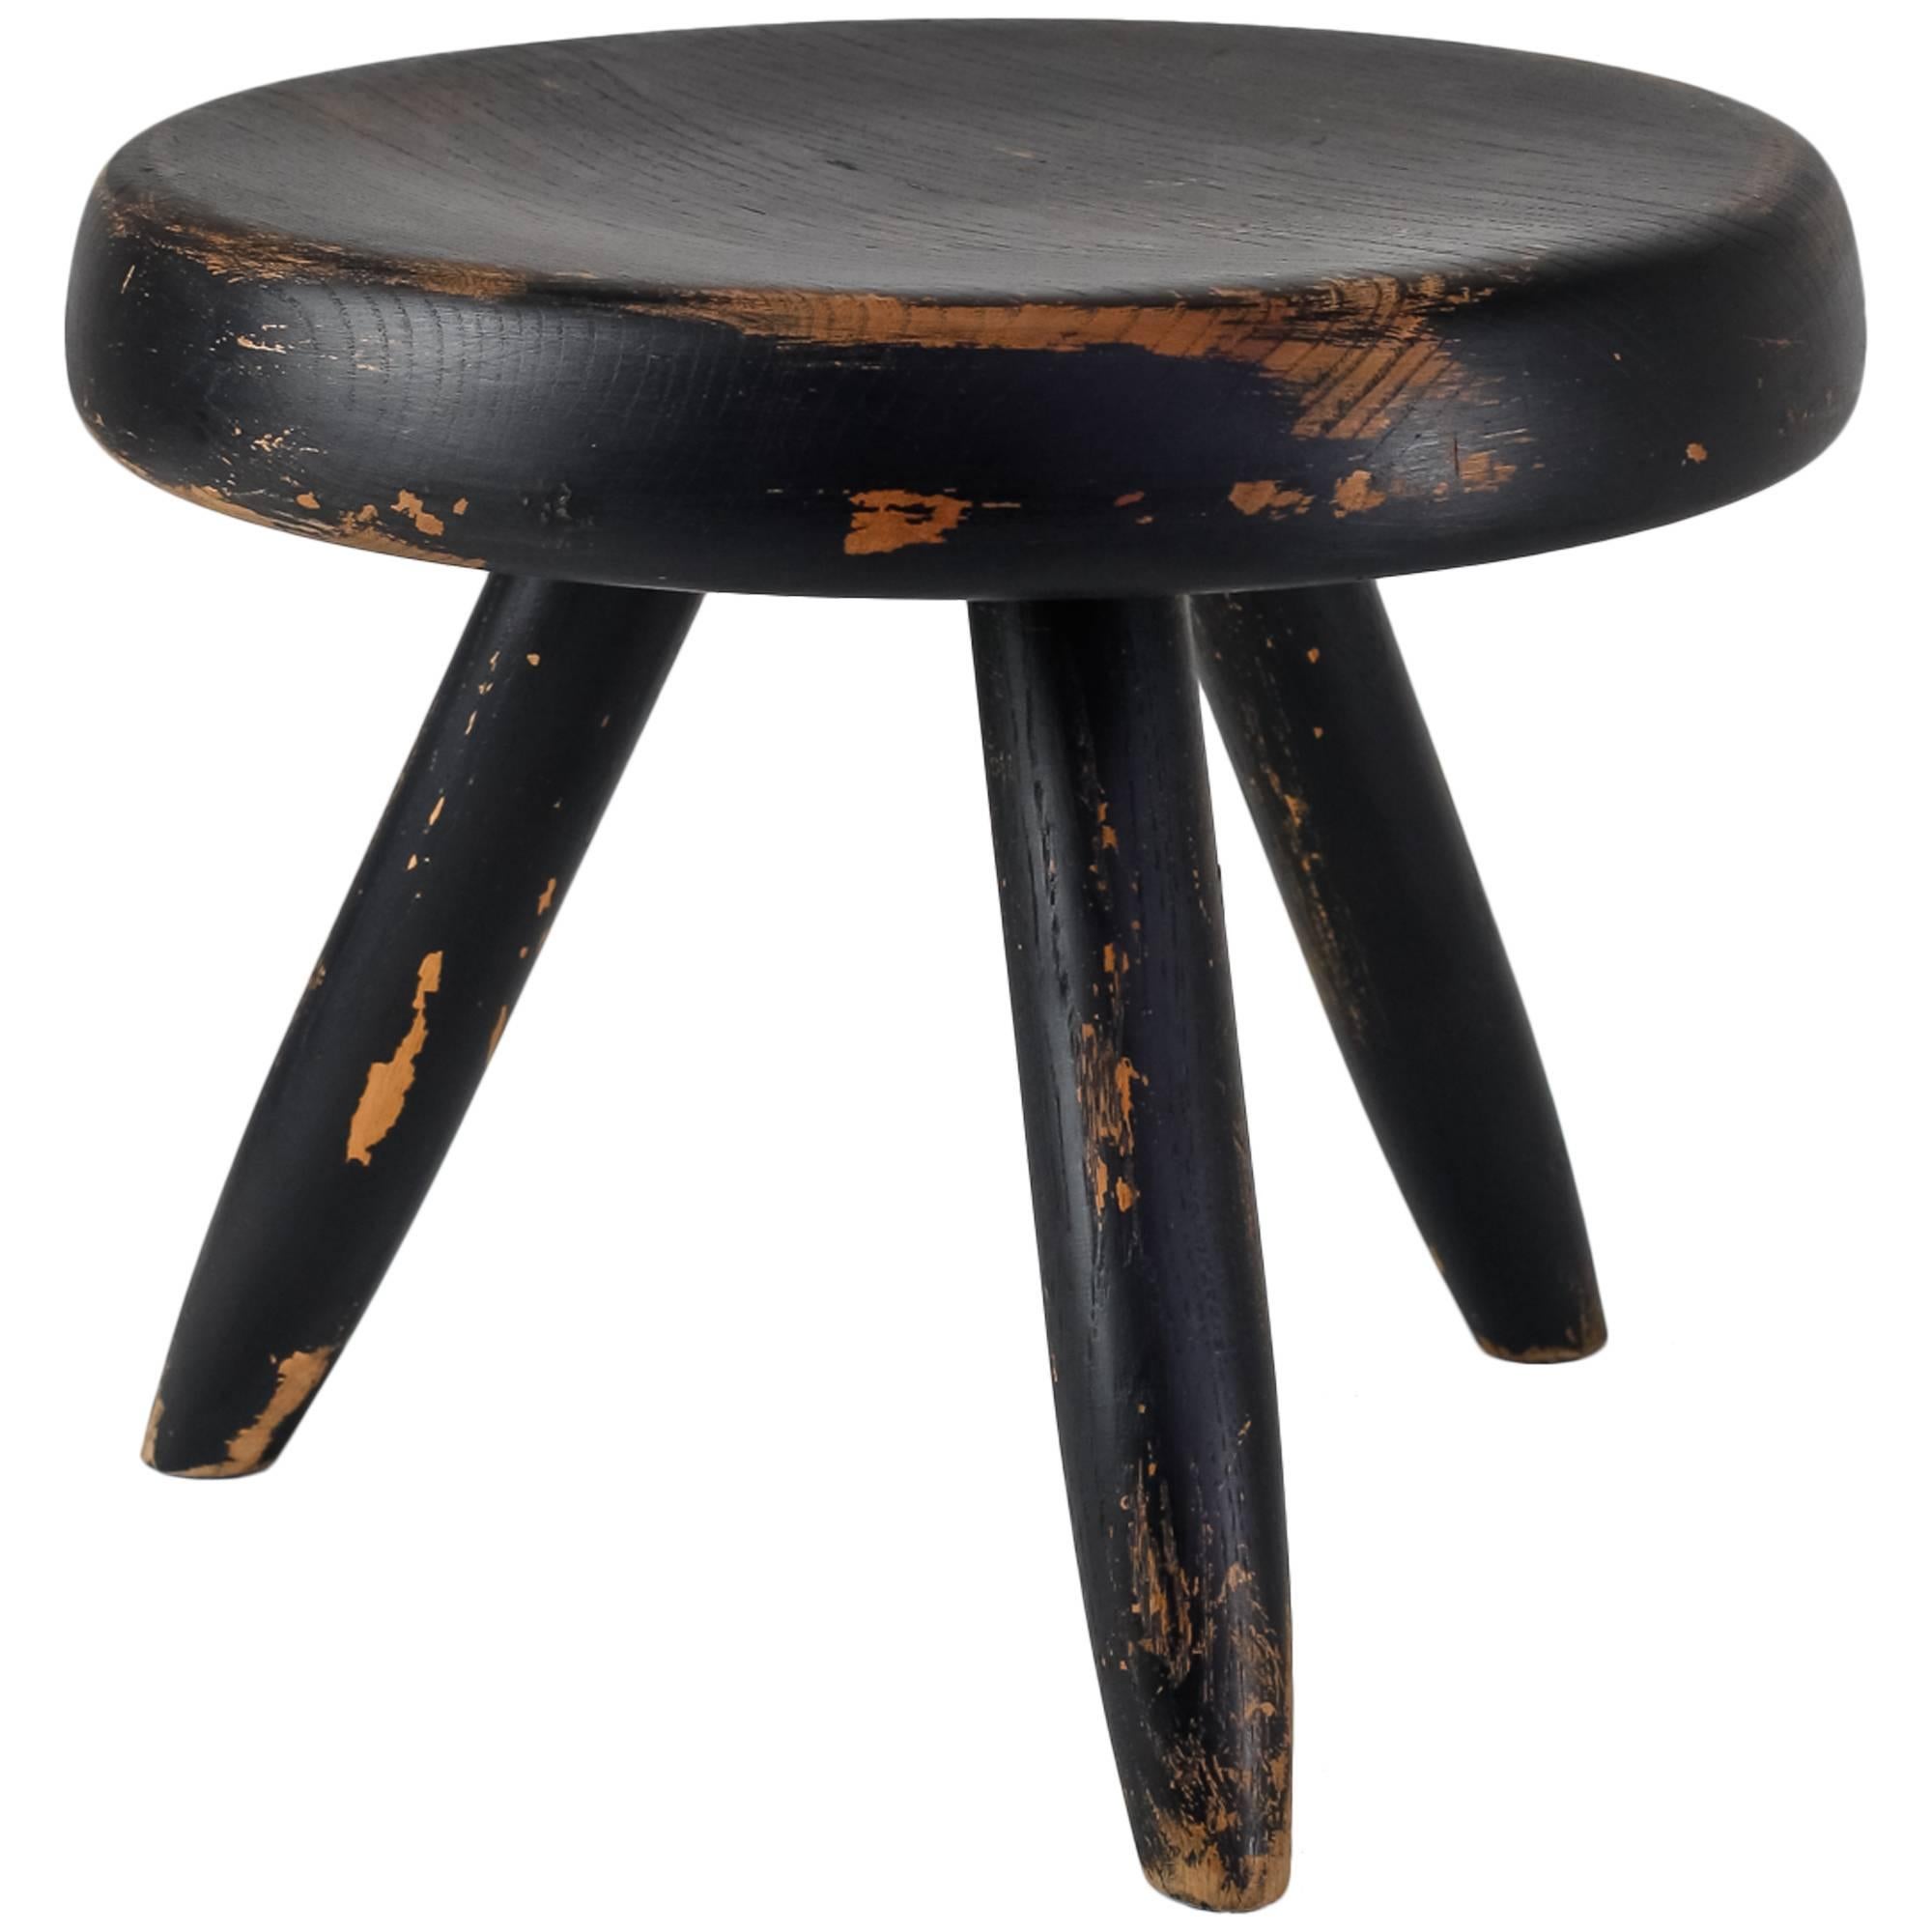 Charlotte Perriand Low Black Ash Tripod Stool, France, 1950s-1960s For Sale